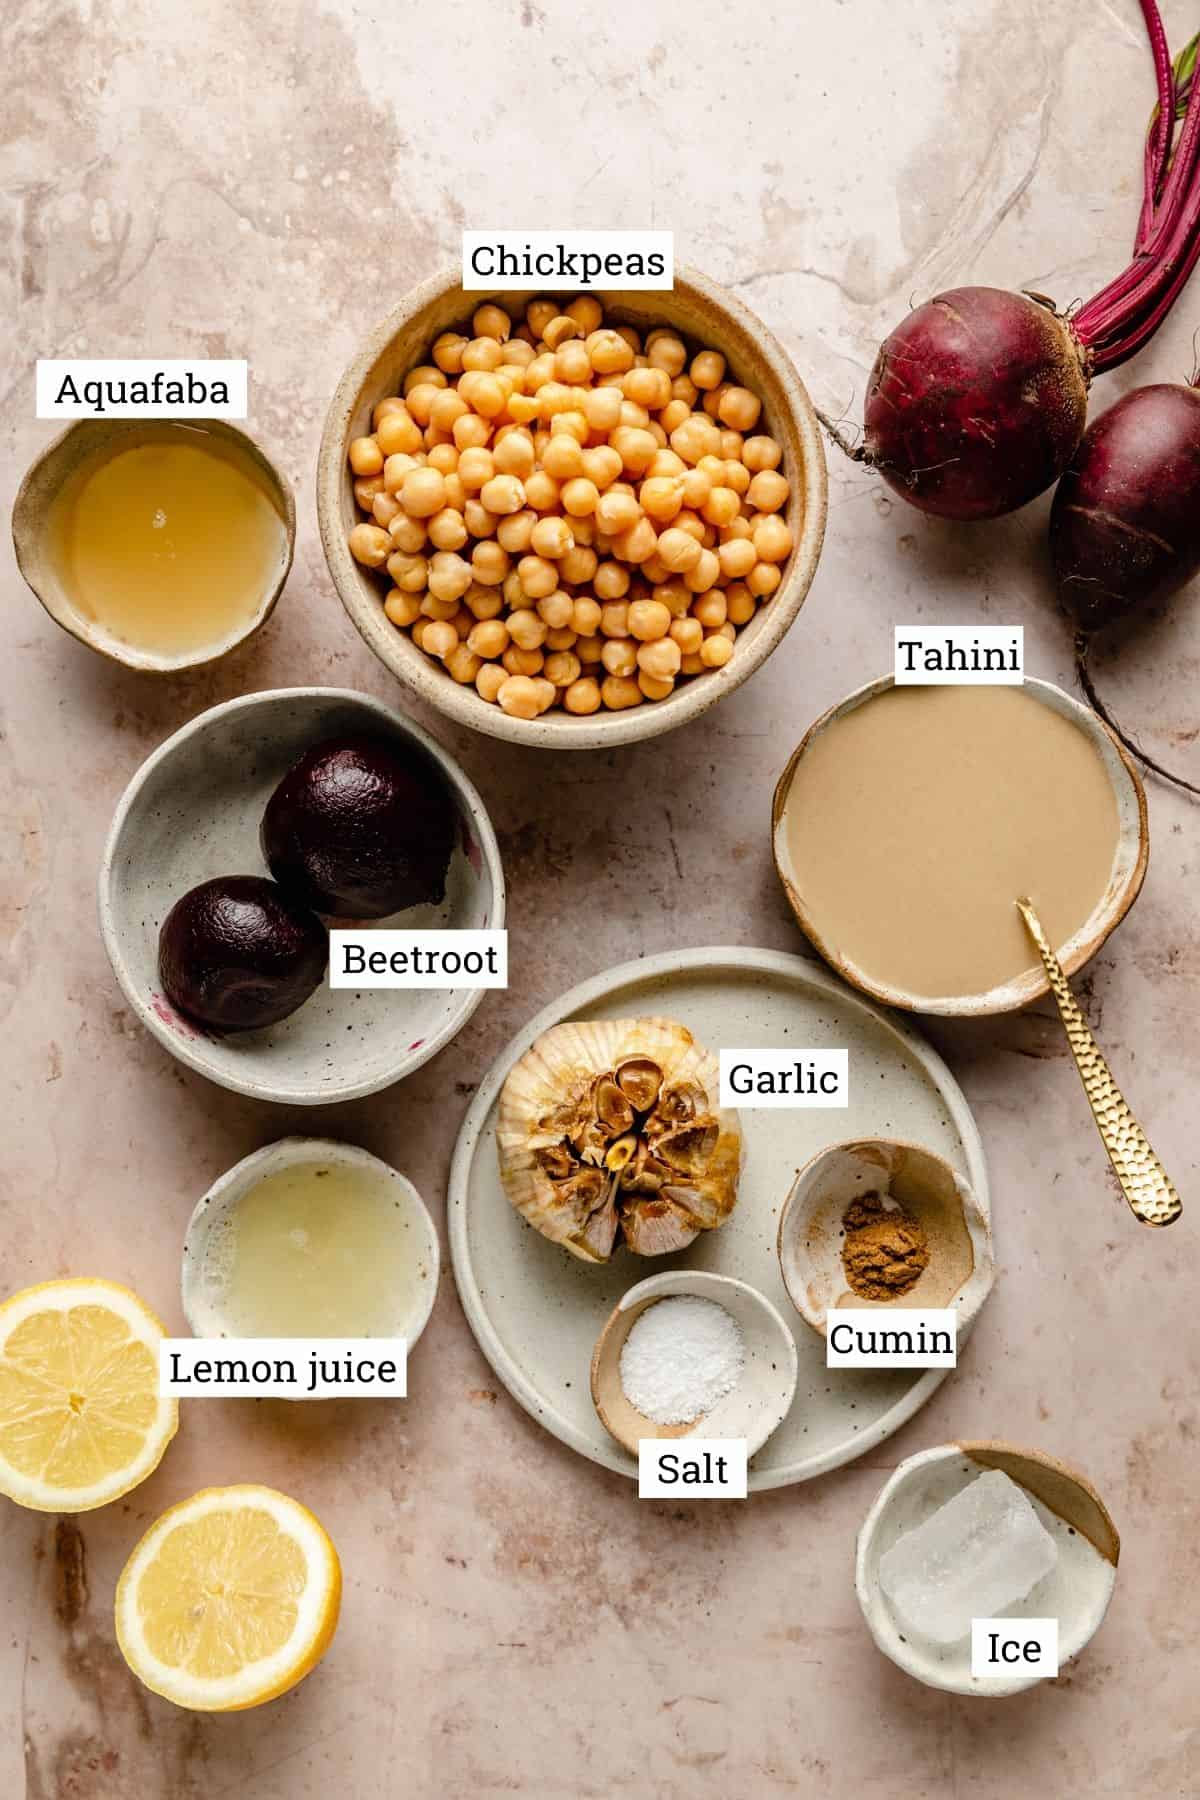 Ingredients for hummus in various bowls with labels.